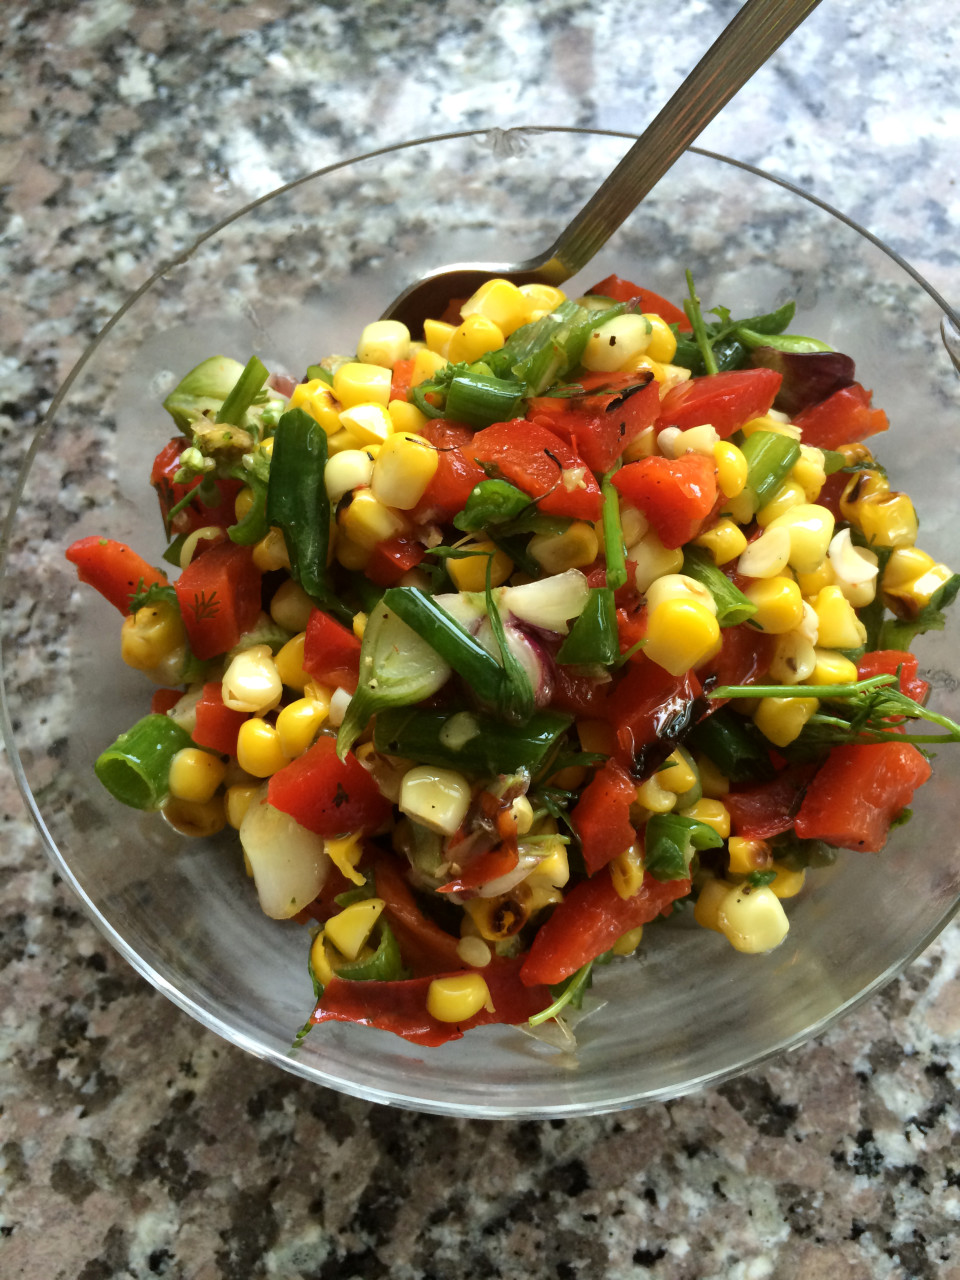 "Grilled Corn Relish" made by Kathy. (Kathy Gunst/Here & Now)